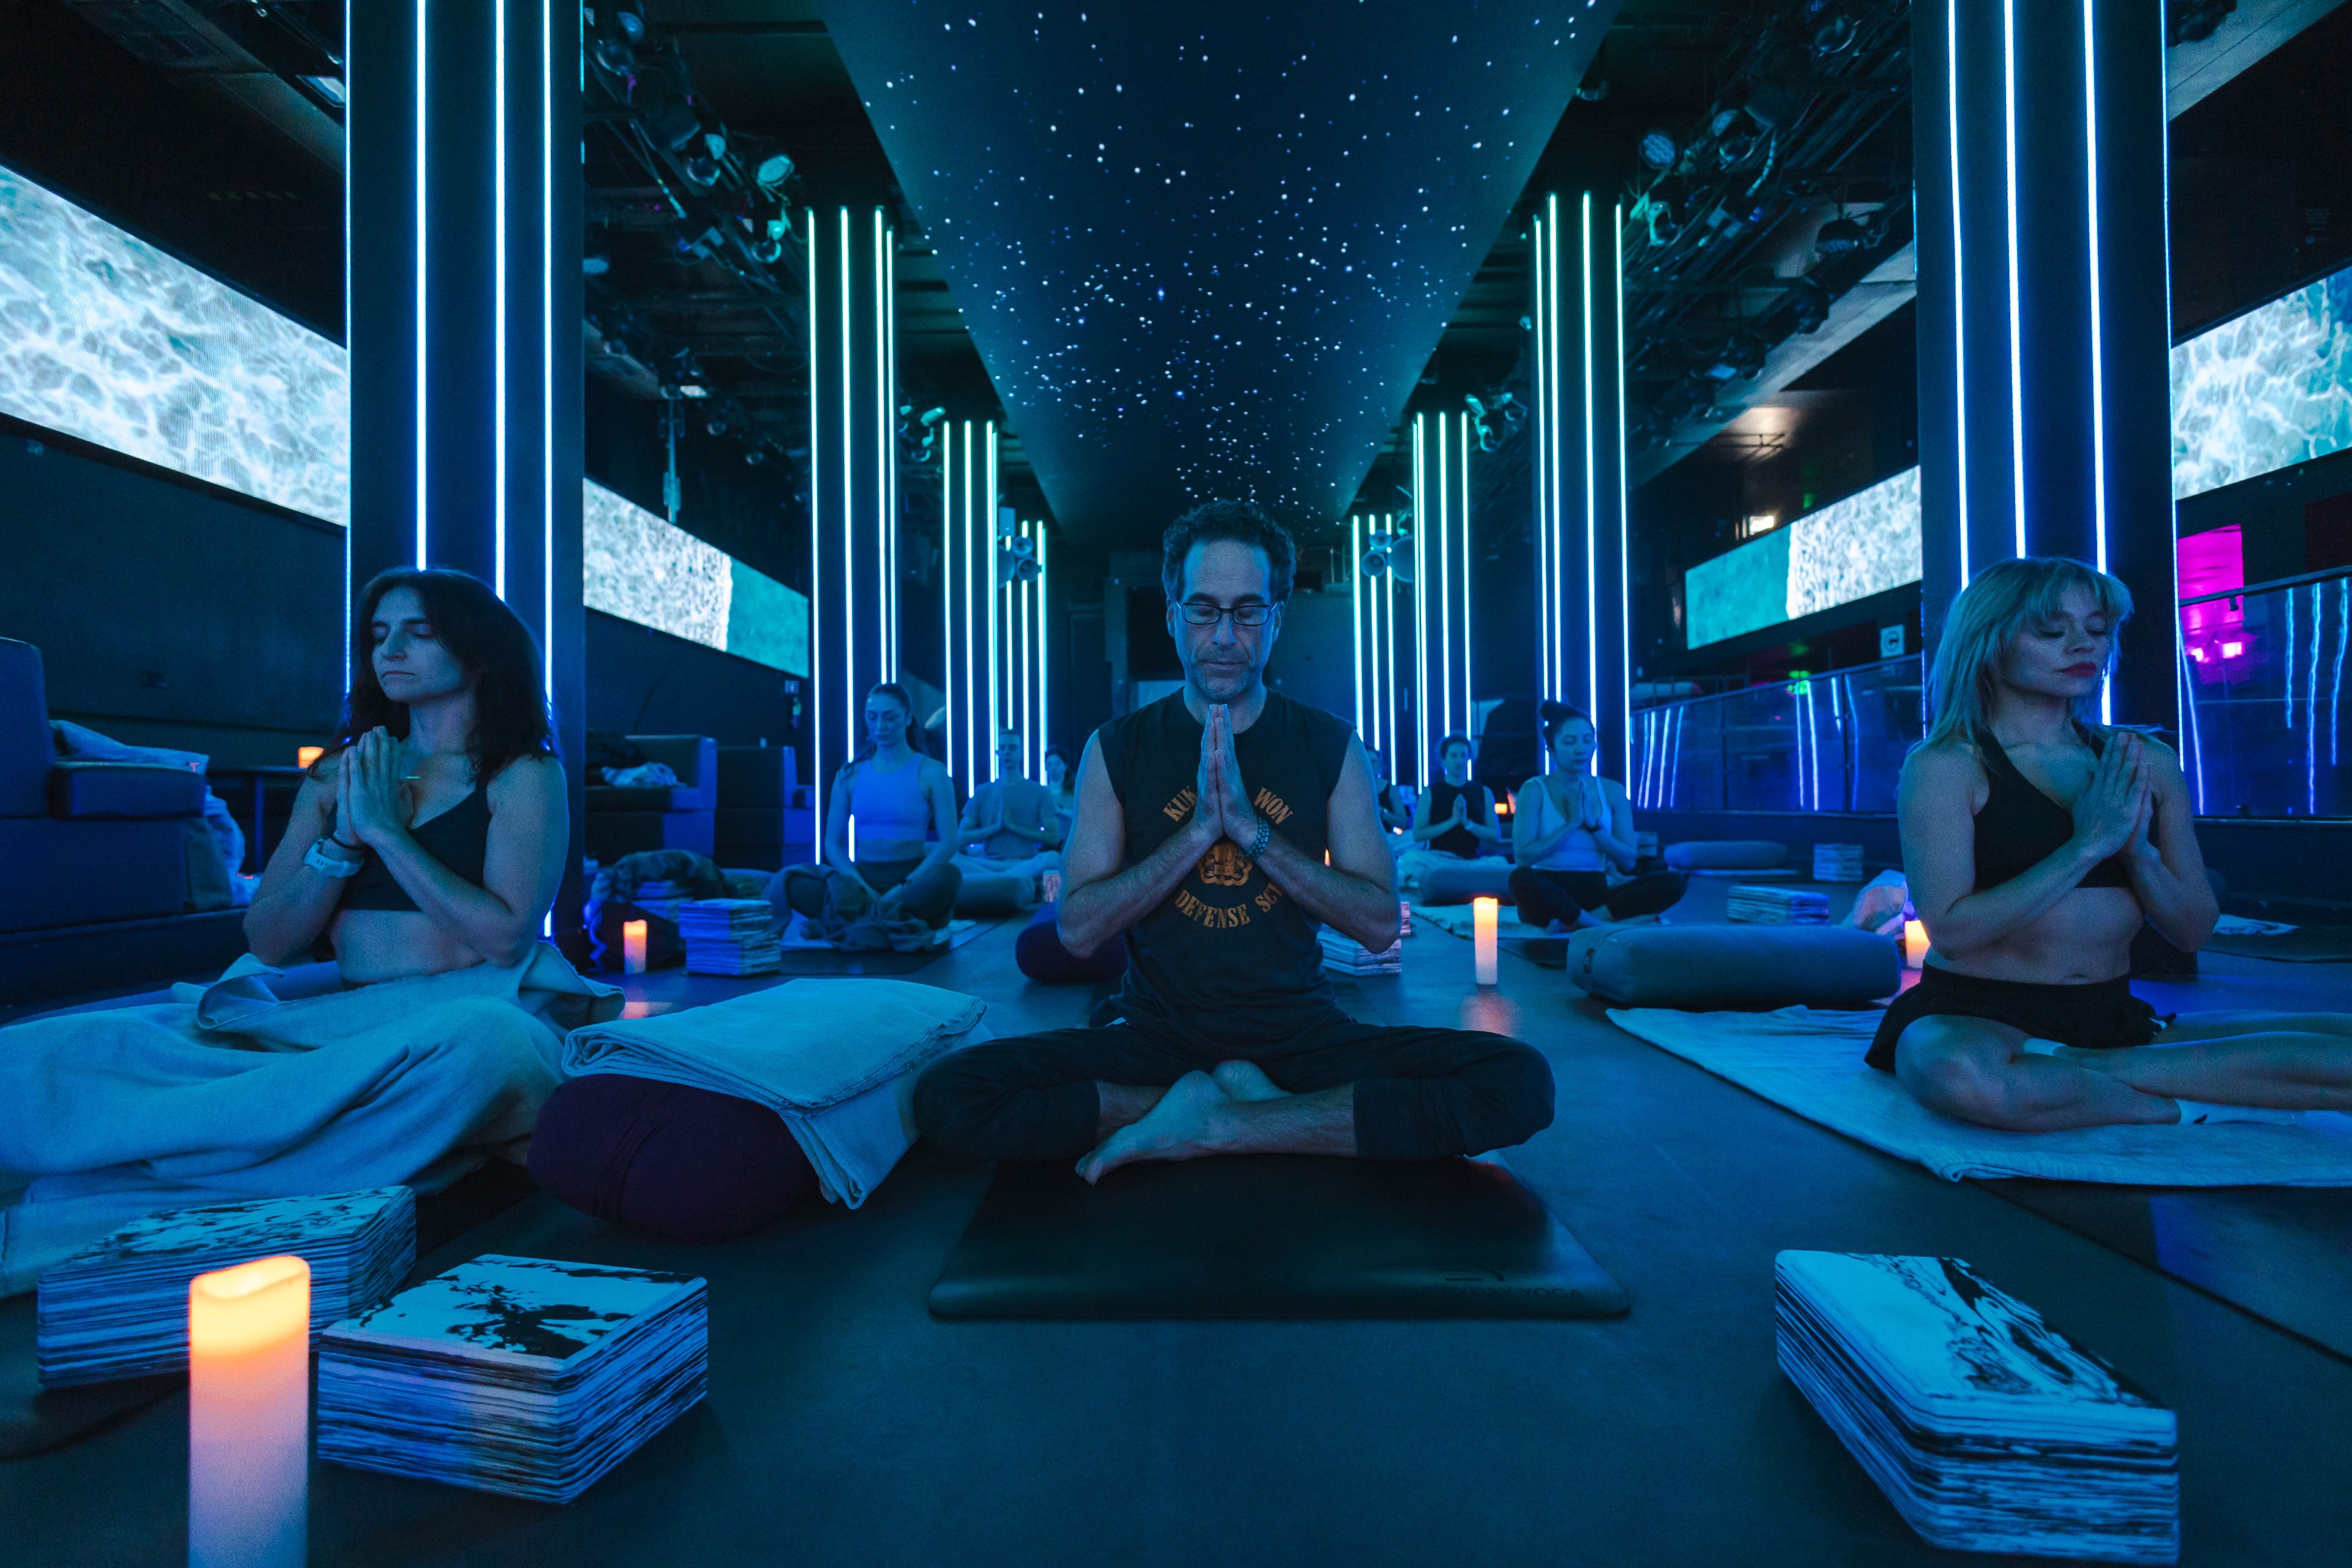 People meditate in a room with blue lighting, LED columns, starry ceiling, and video screens.